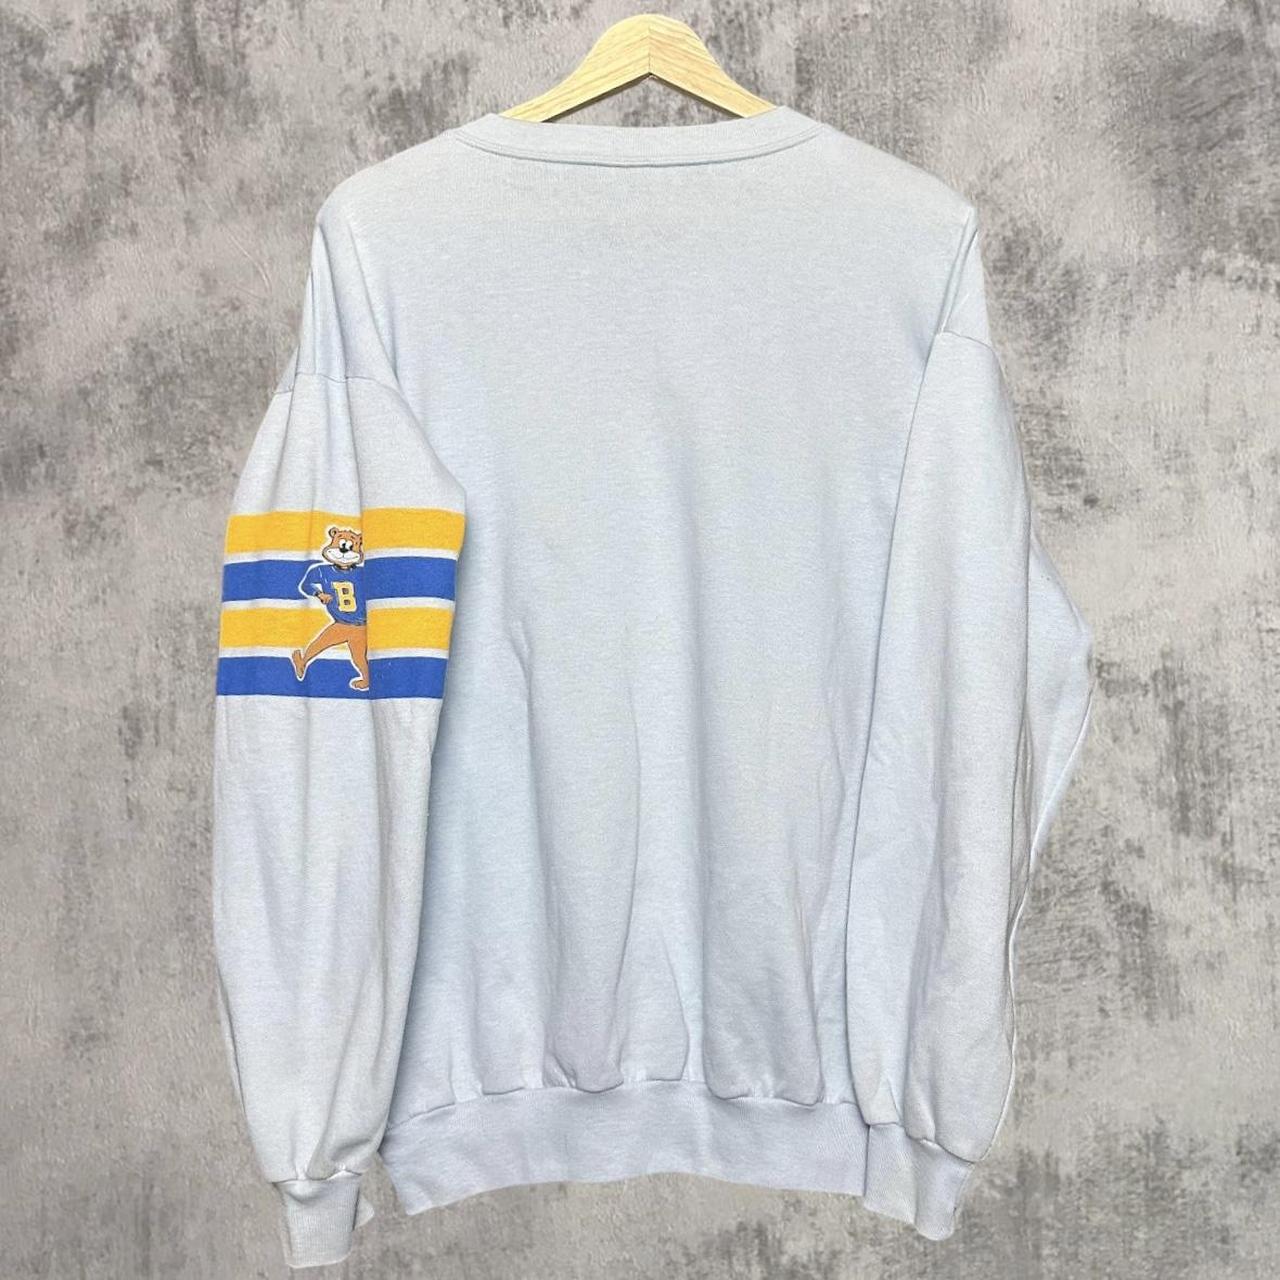 VINTAGE UCLA BRUINS SWEATER one of a kind tbh, not - Depop